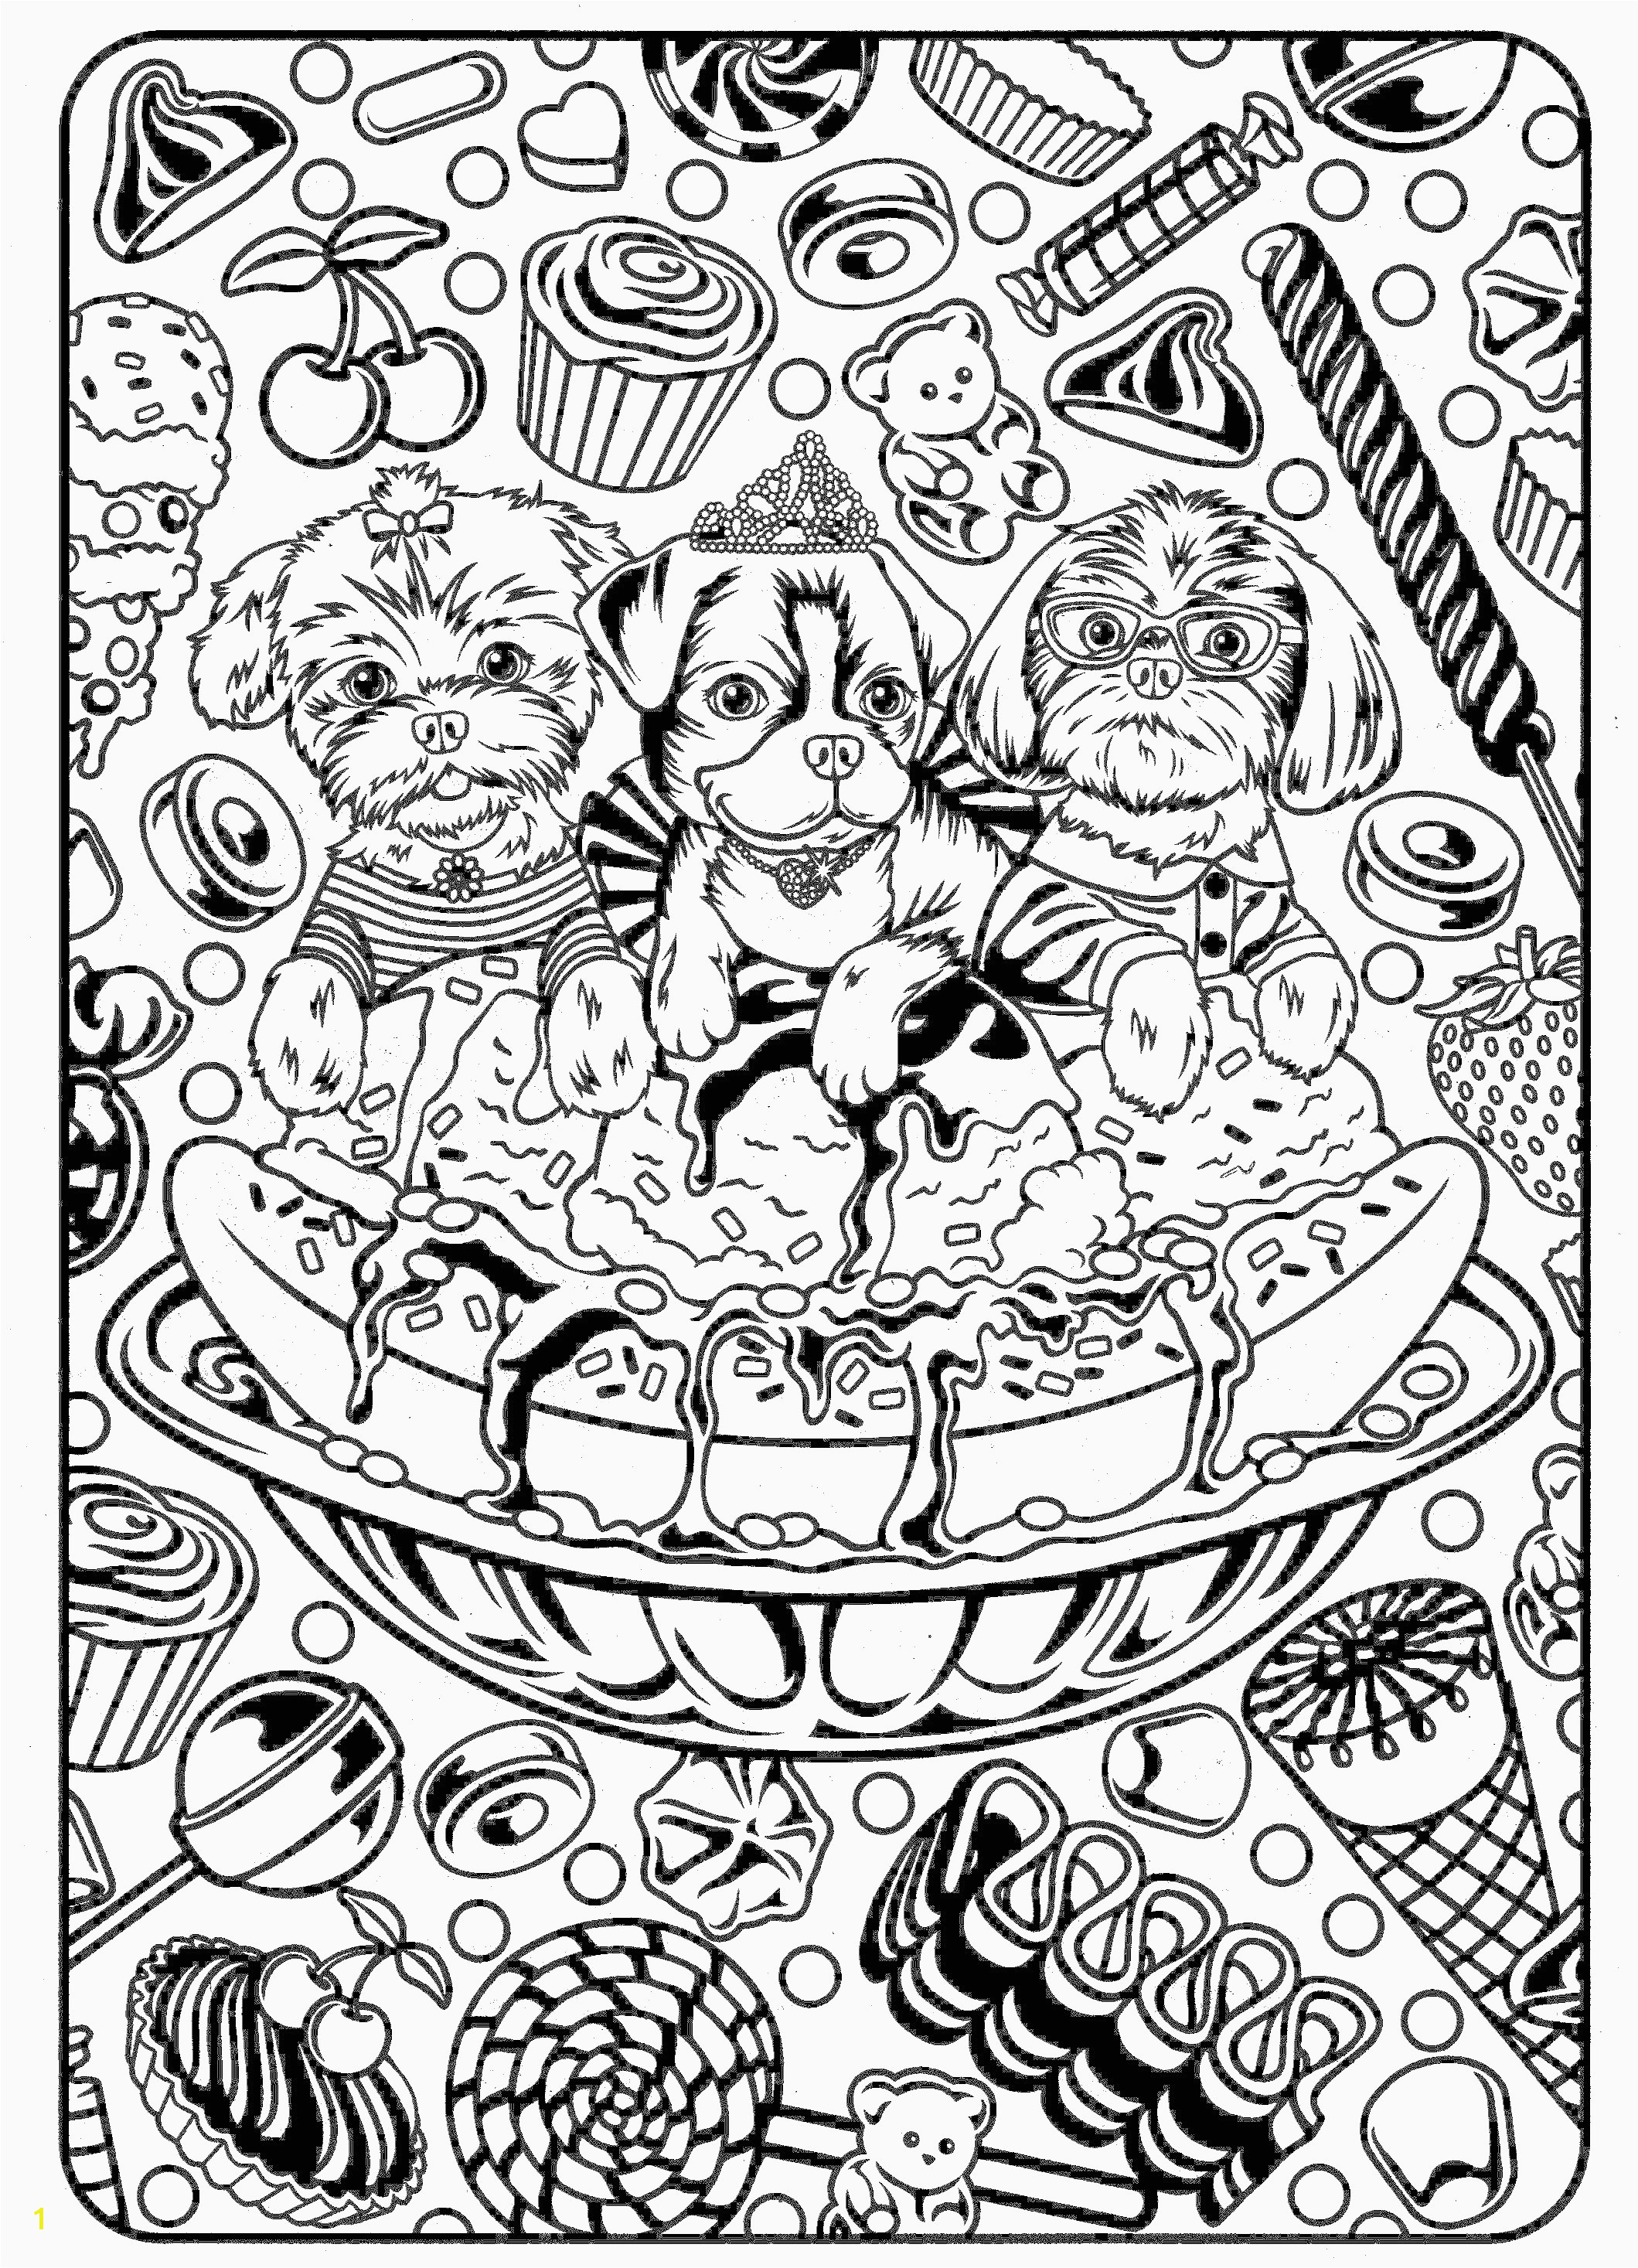 Open Window Coloring Page Open Window Coloring Page Elegant Coloring Pages Inspirational